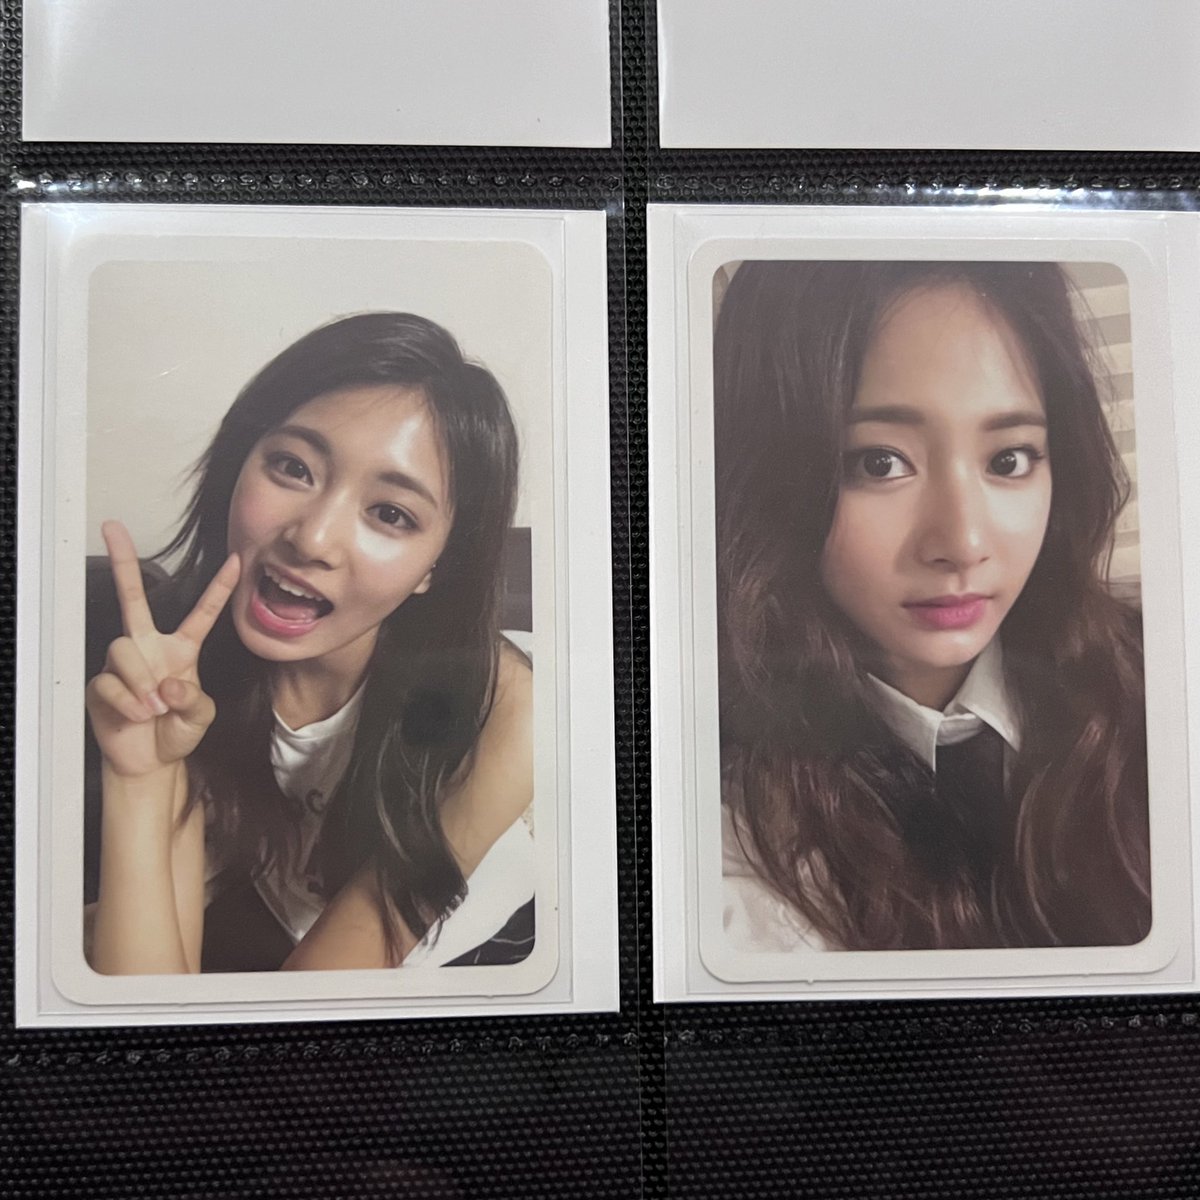 🇲🇾 only 
[wts] official twice’s tzuyu album pc set

💸 :
fancy — RM140 (10 pcs)
likey — RM30 (2 pcs)

💌 free postage to WM (10 - em)
💰tng, s-pay, bank transfer

‼️ only selling as a set, don’t ask to buy individual cards

#pasartwice #wtstwice @pasartwice